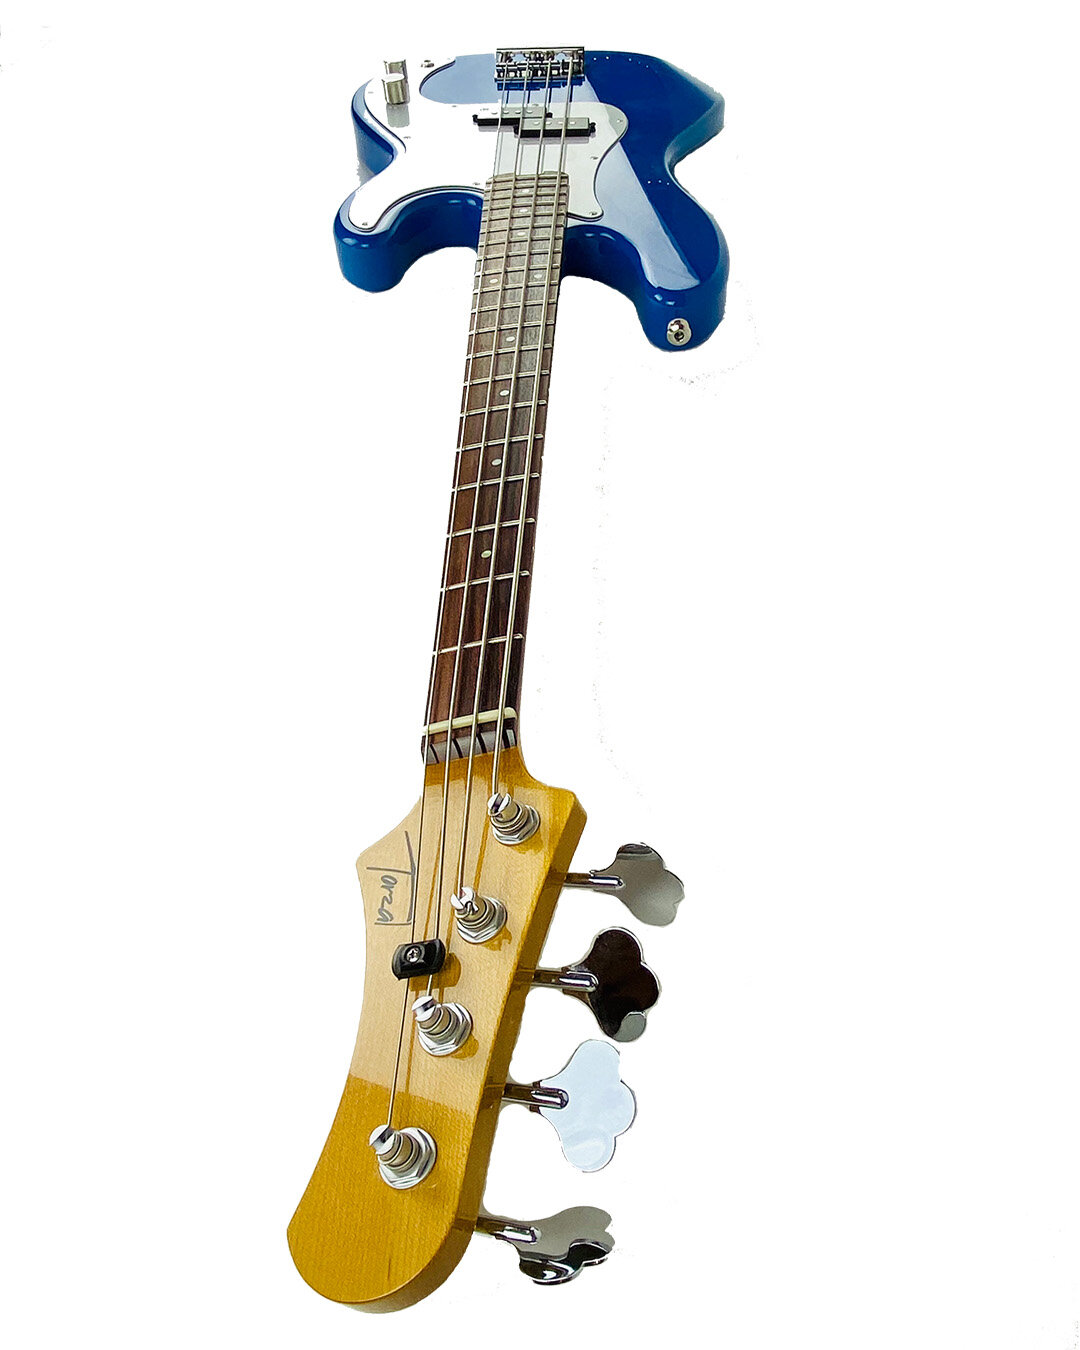 Here's the first of it's kind: a 20&deg; Natural Twist 32&quot; scale 4-string P-bass. Alder body, hard maple neck, rosewood fingerboard, Dodger blue. 
32&quot; is a great scale for a 4-string. What do you think?
.
.
.
.
#bassplayersunited #bassmusic